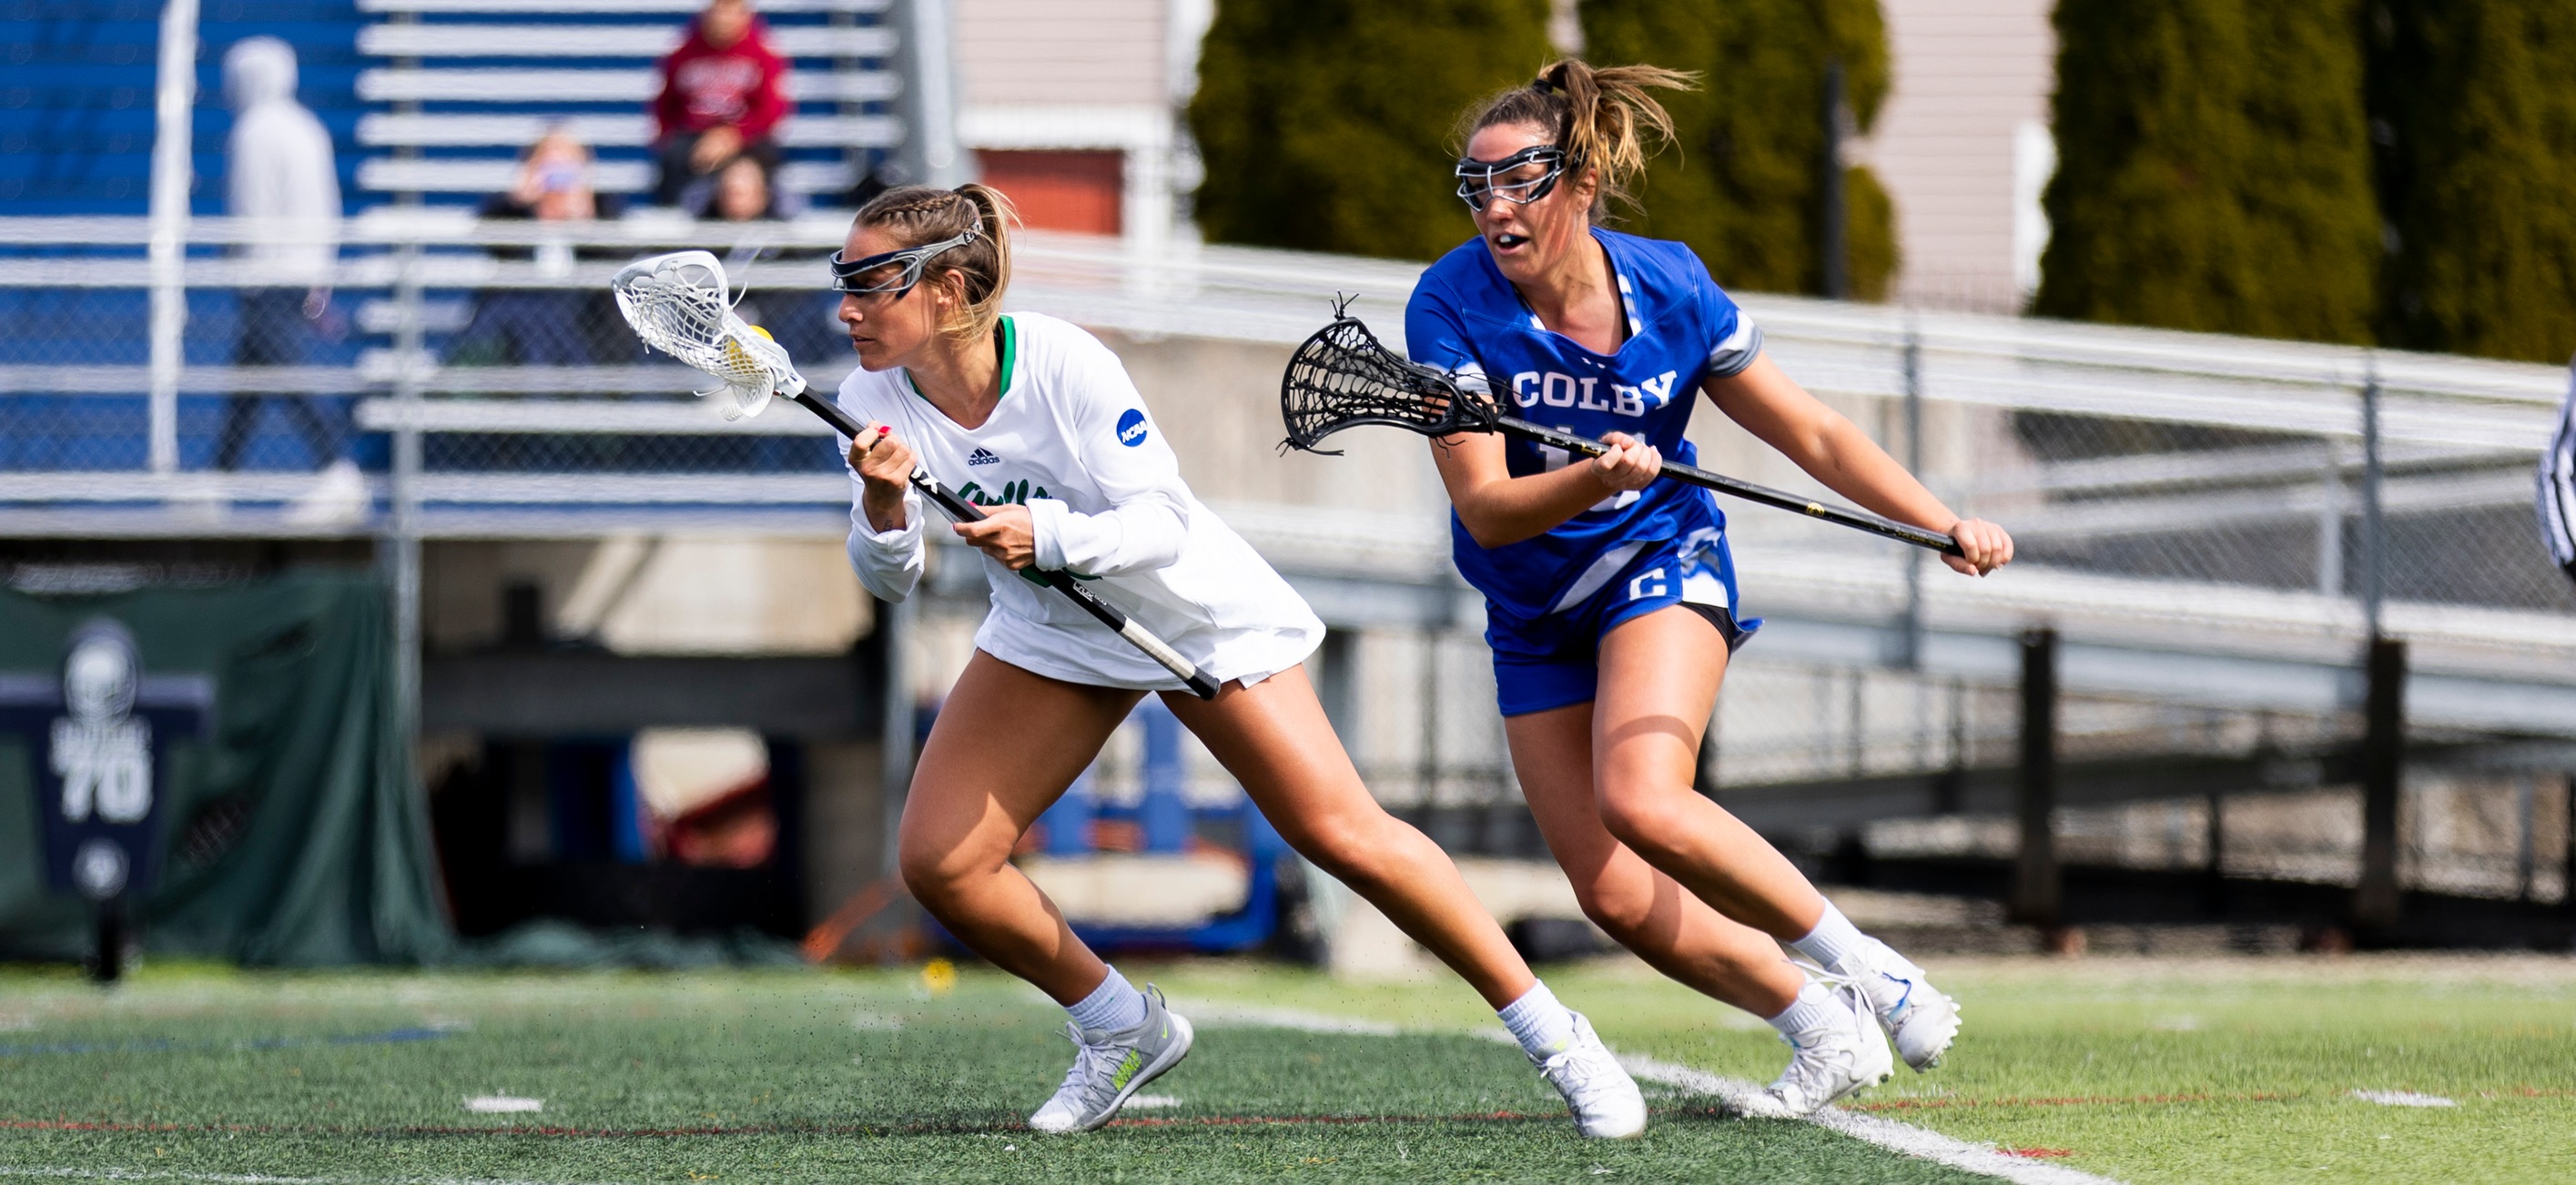 No. 6 Colby Tops Women’s Lacrosse, 21-7